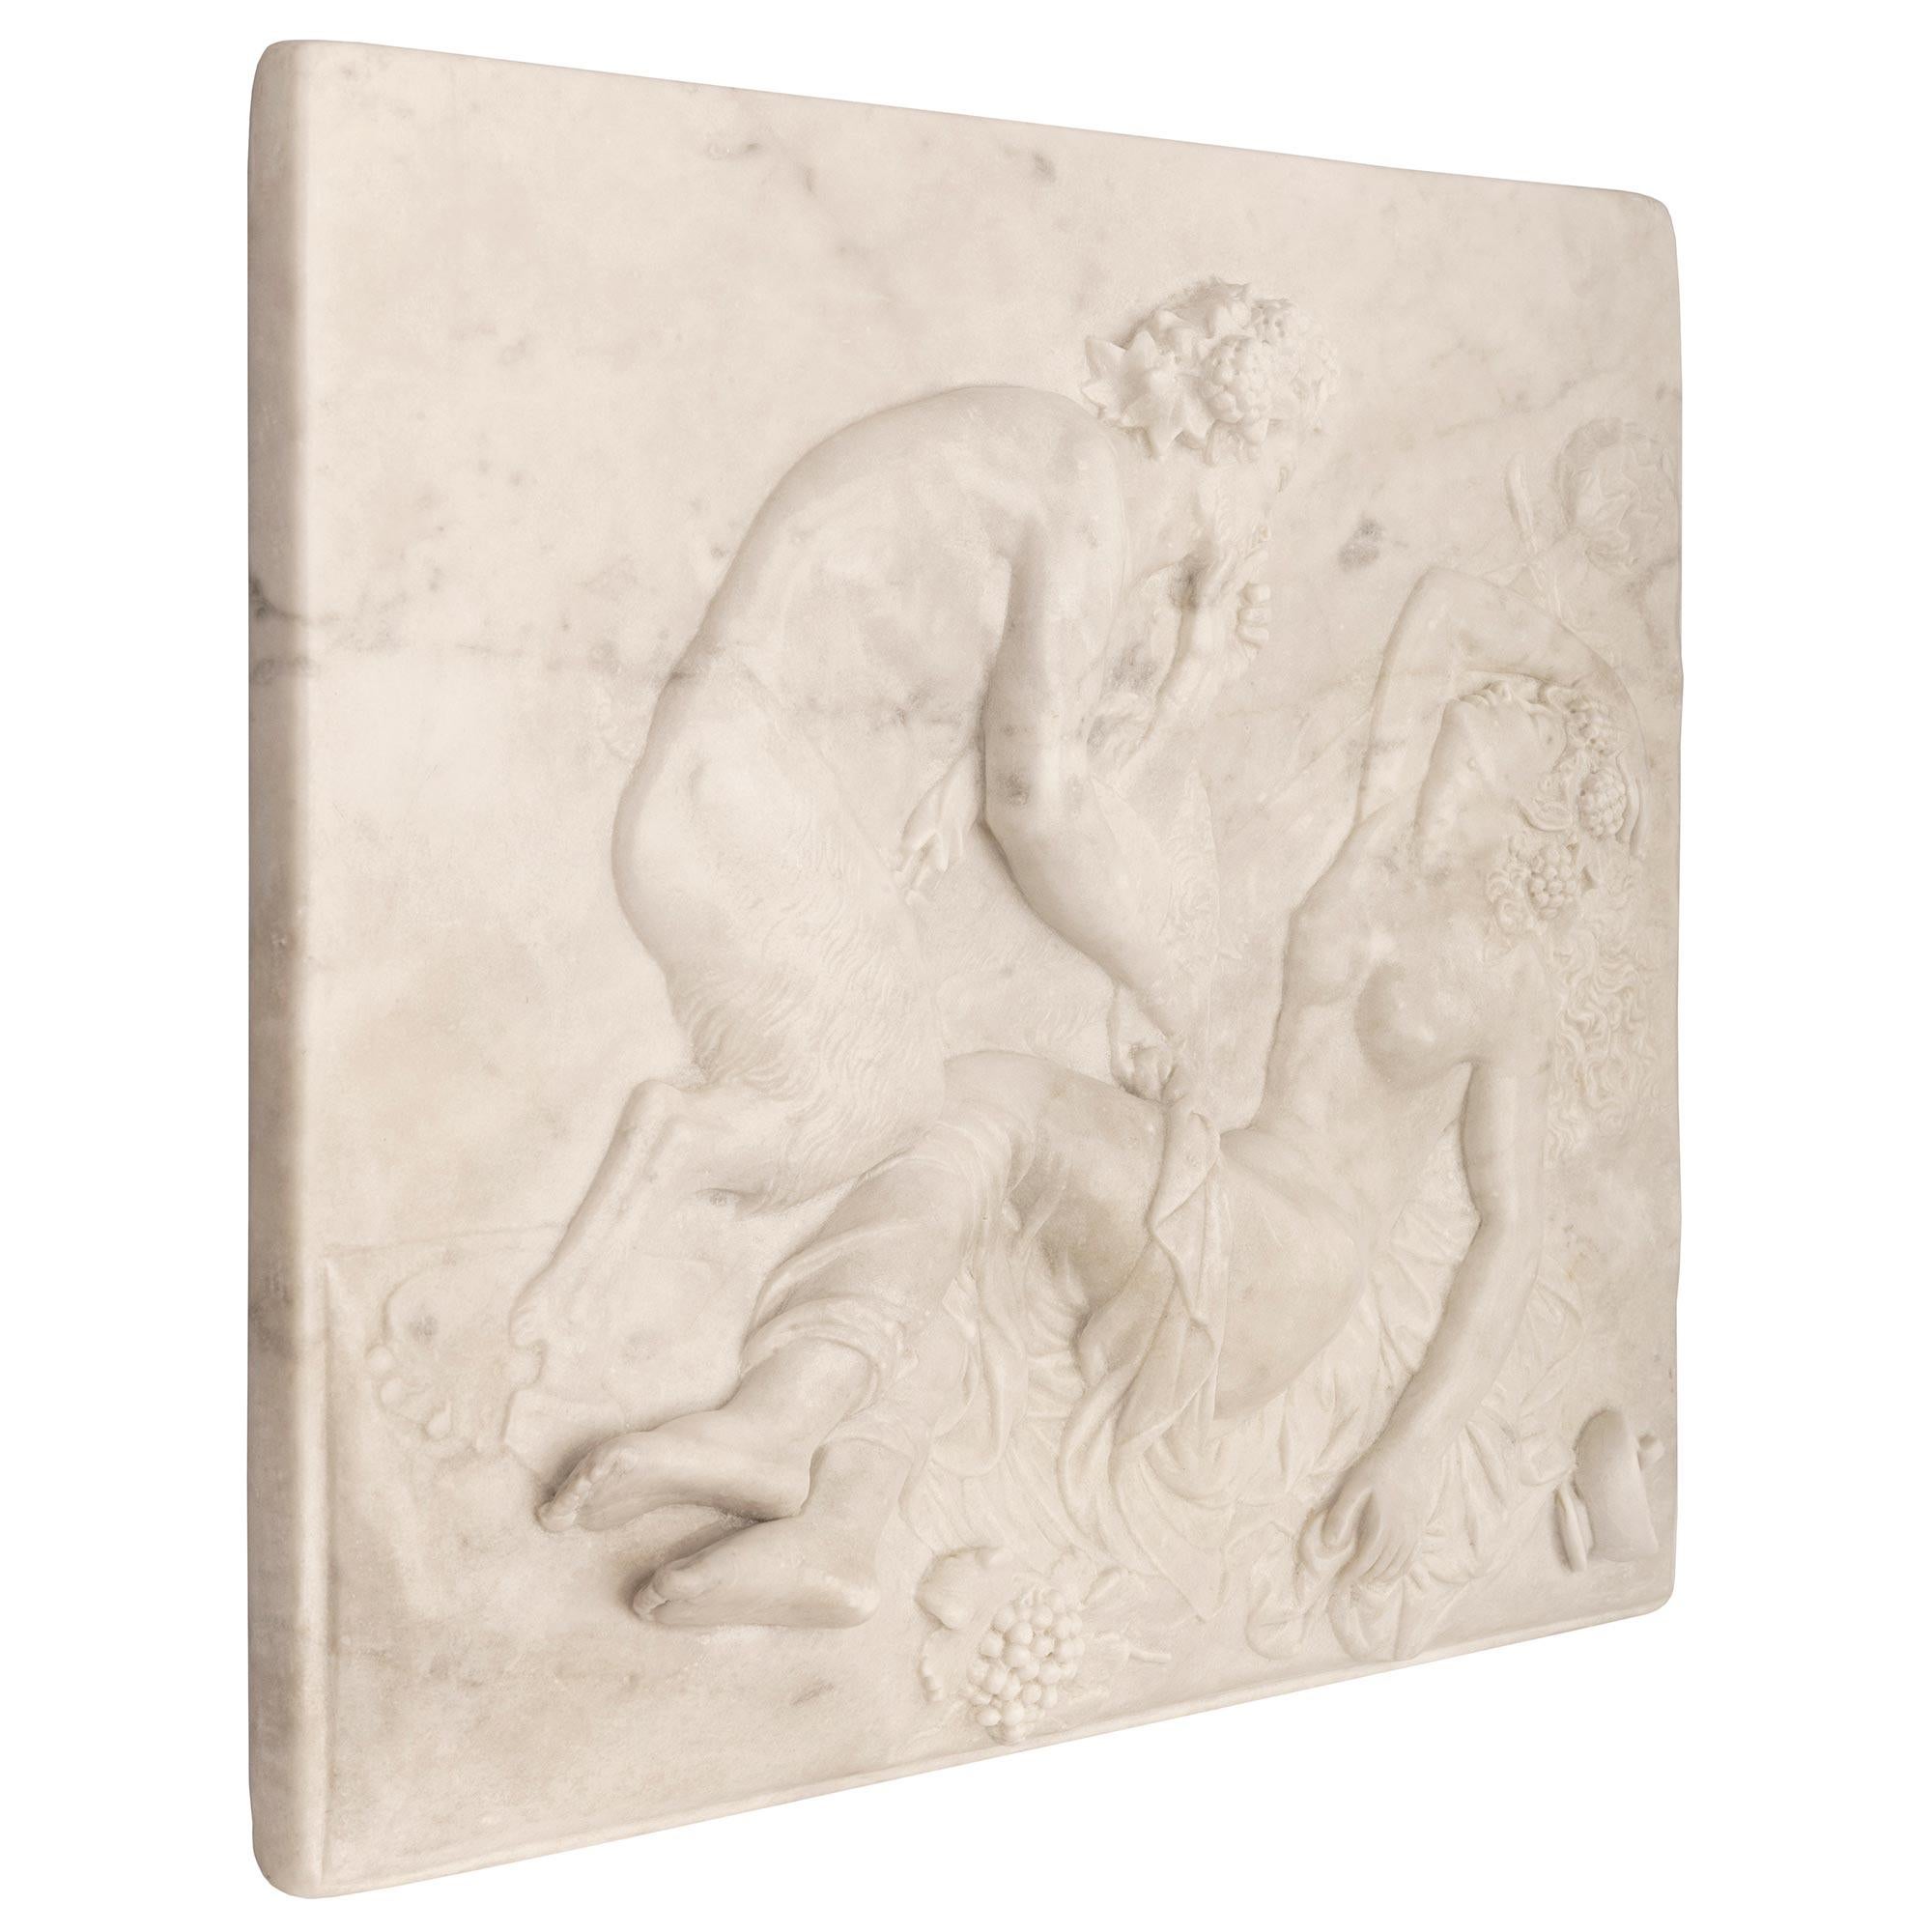 A stunning and extremely decorative Italian 19th century Neo-Classical st. Grand Tour period white carrara marble decorative wall plaque. The wonderfully executed plaque depicts a richly sculpted scene of a Bacchanalian satyr disrobing a beautiful